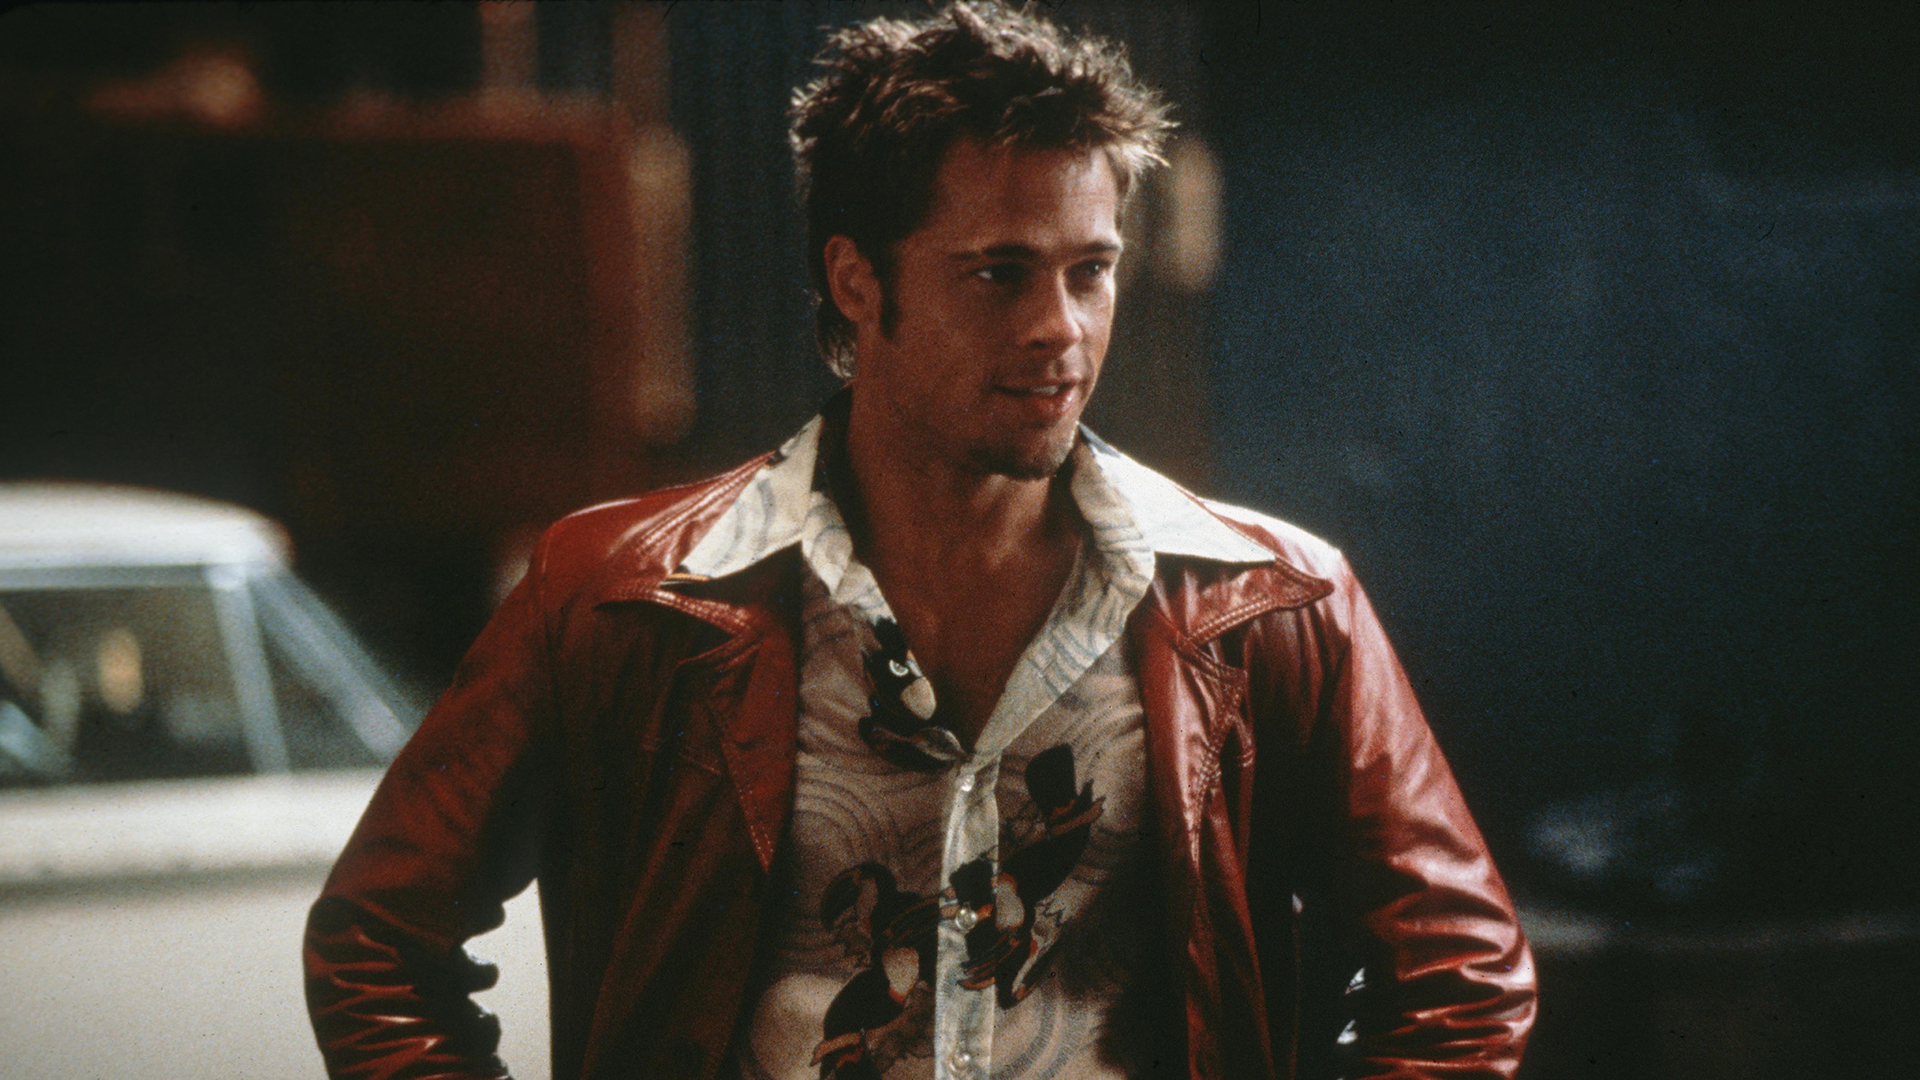 Brad Pitt 15 years after 'Fight Club:' I don't dabble in things I used to